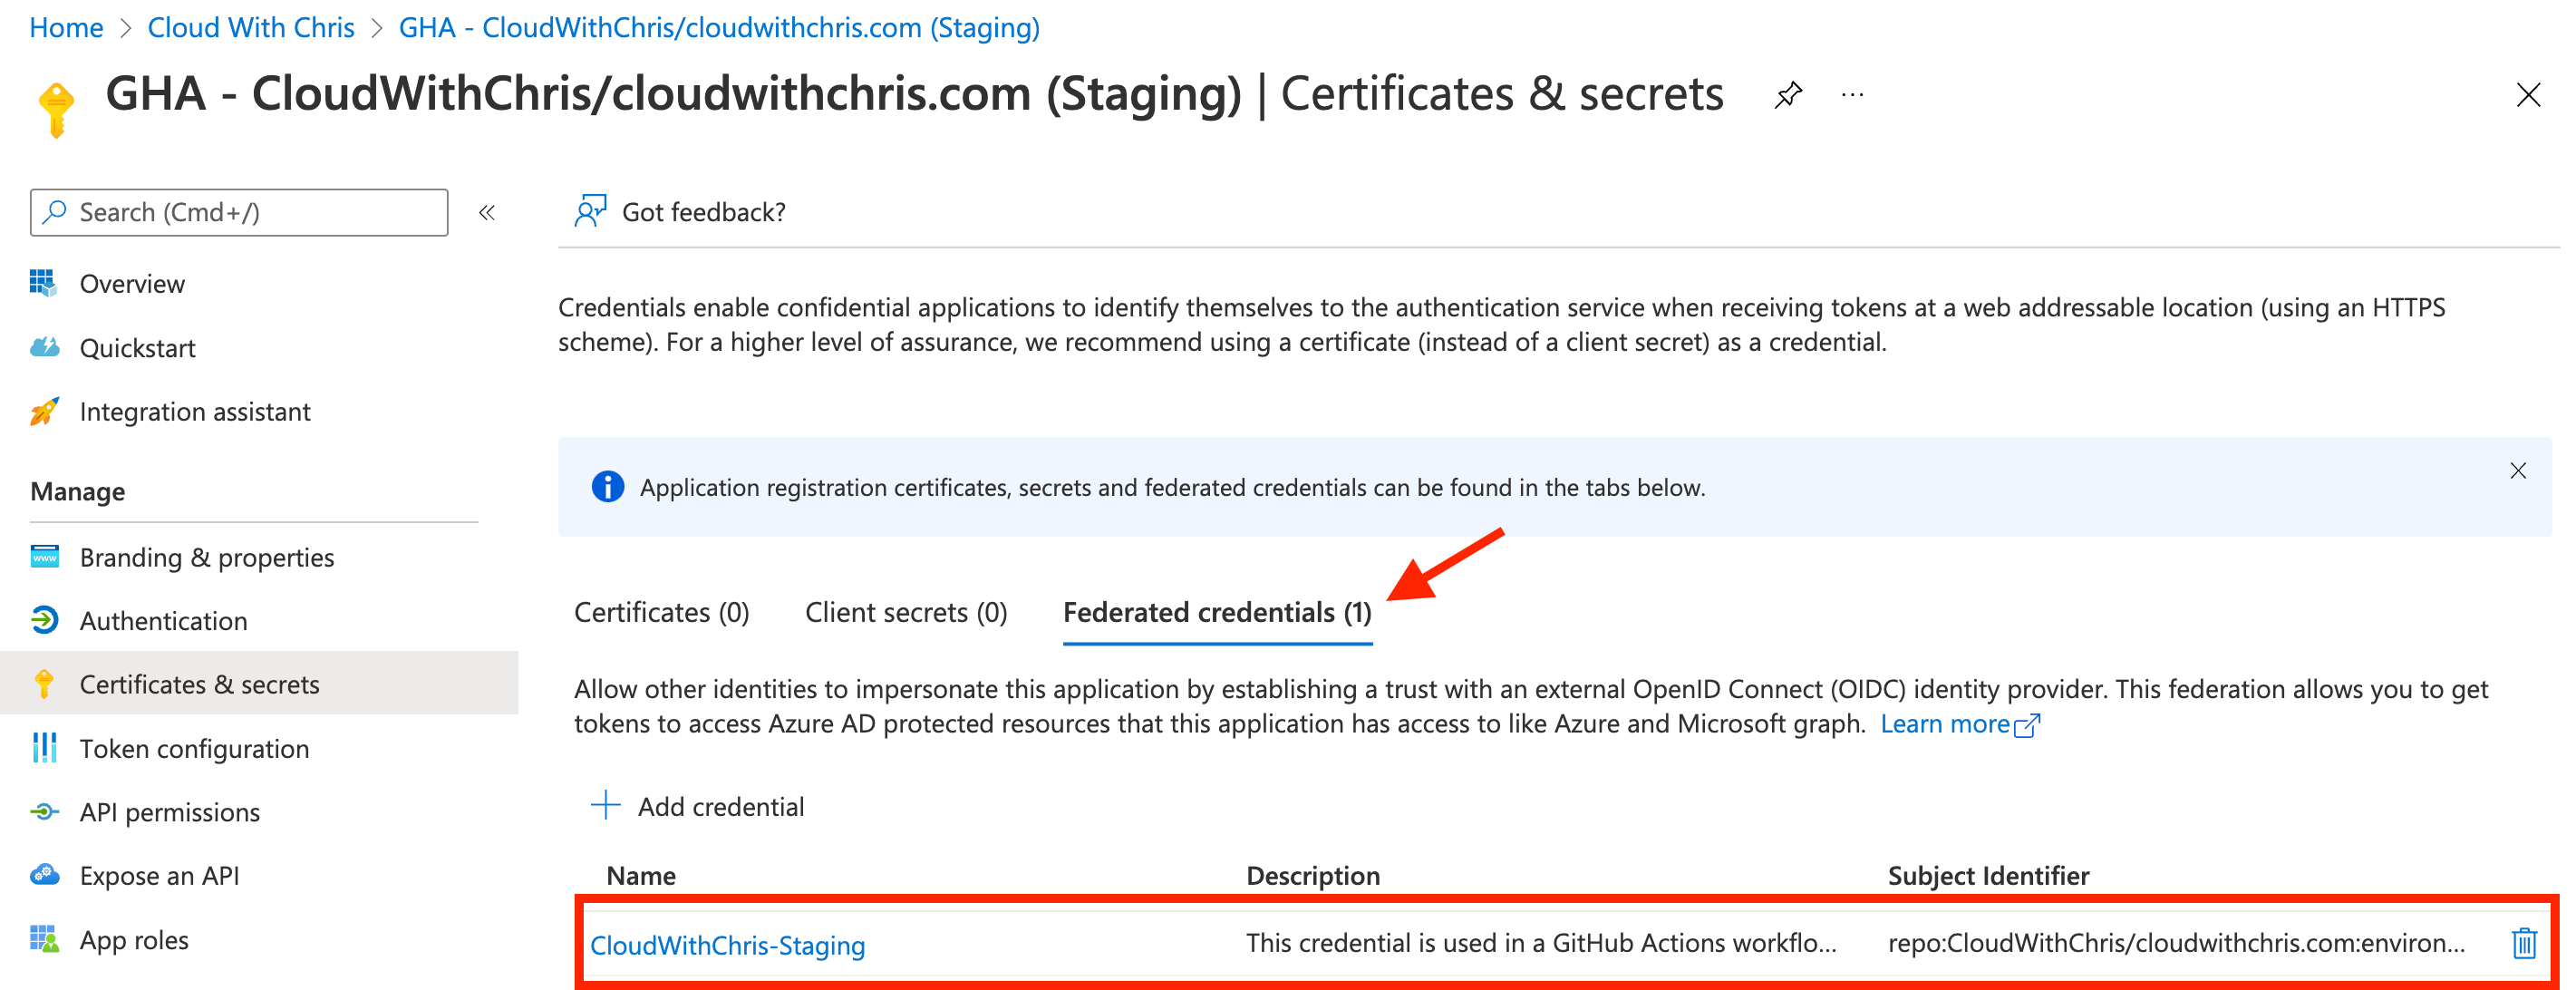 Screenshot showing that there are 0 Certificates, 0 Client Secrets and 1 federated credential (CloudWithChris-Staging).